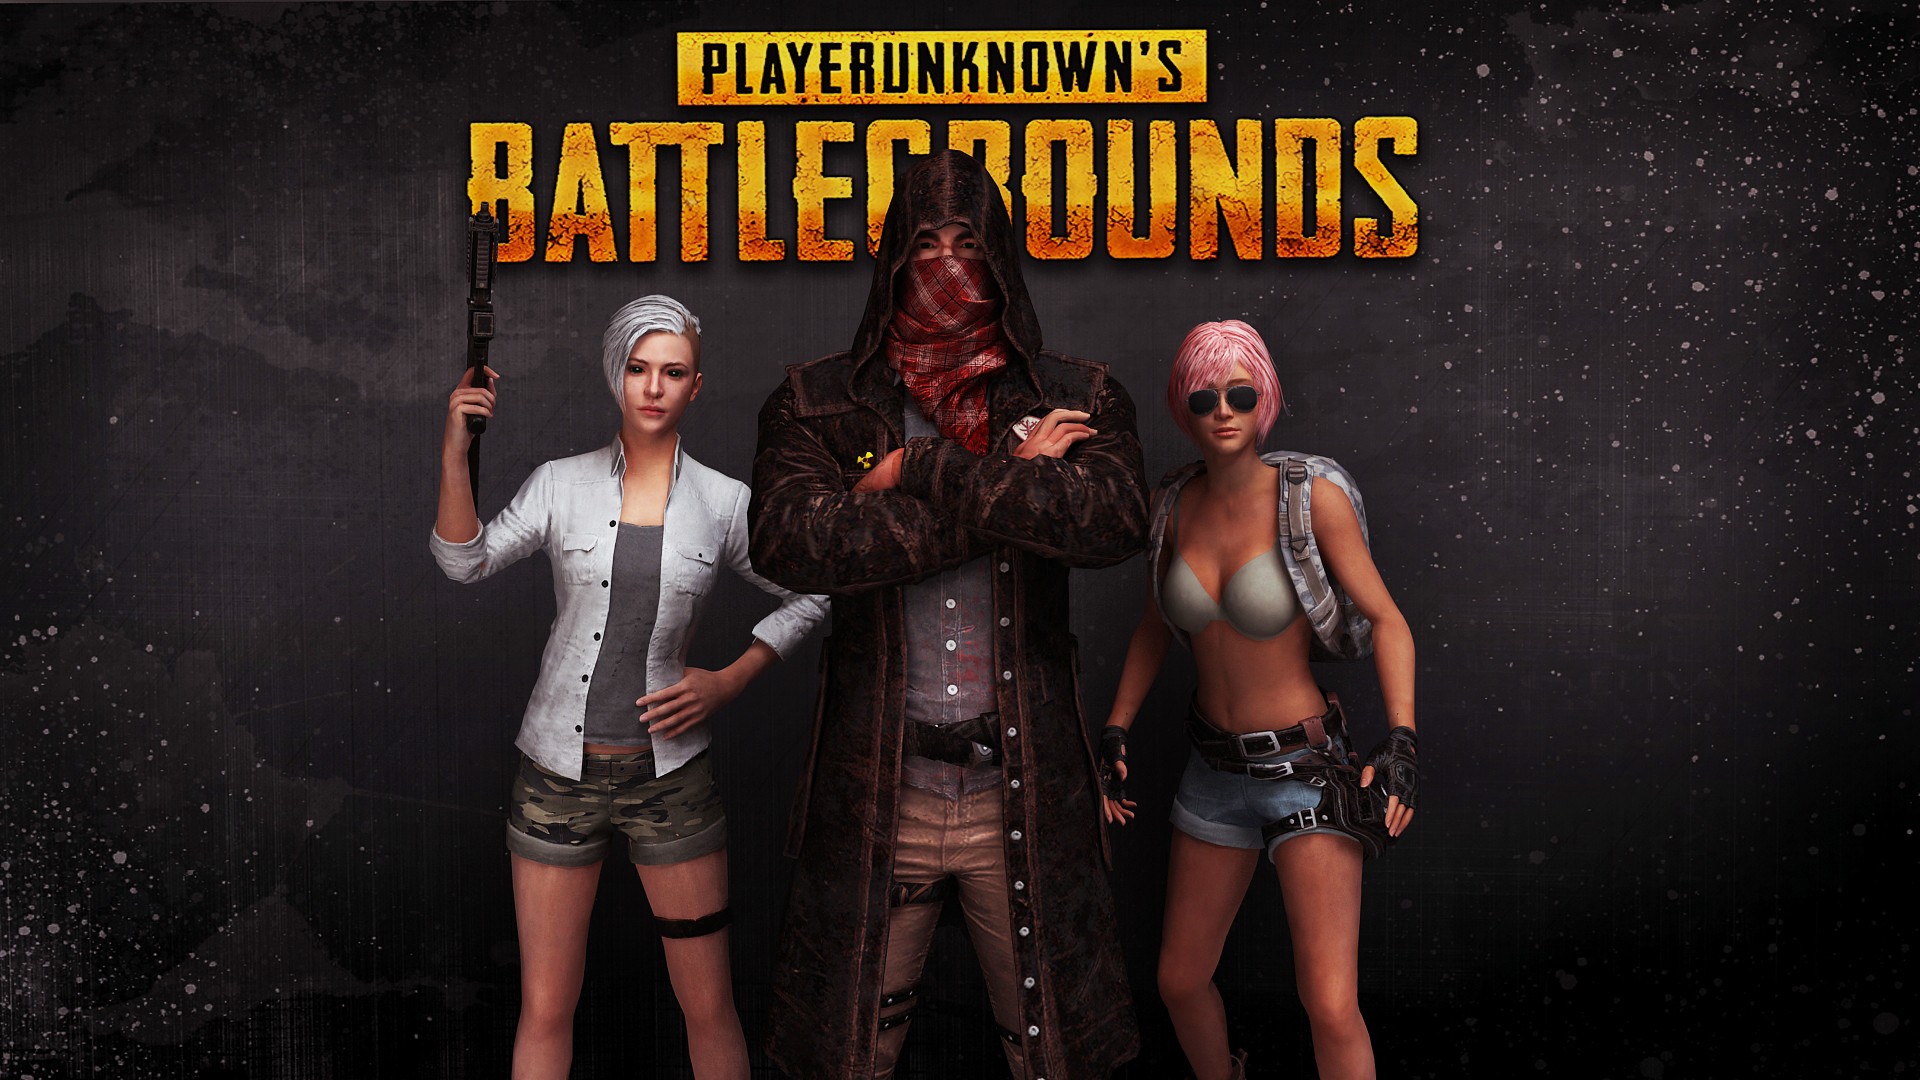 PUBG Xbox One Desktop Wallpaper with image resolution 1920x1080 pixel. You can use this wallpaper as background for your desktop Computer Screensavers, Android or iPhone smartphones